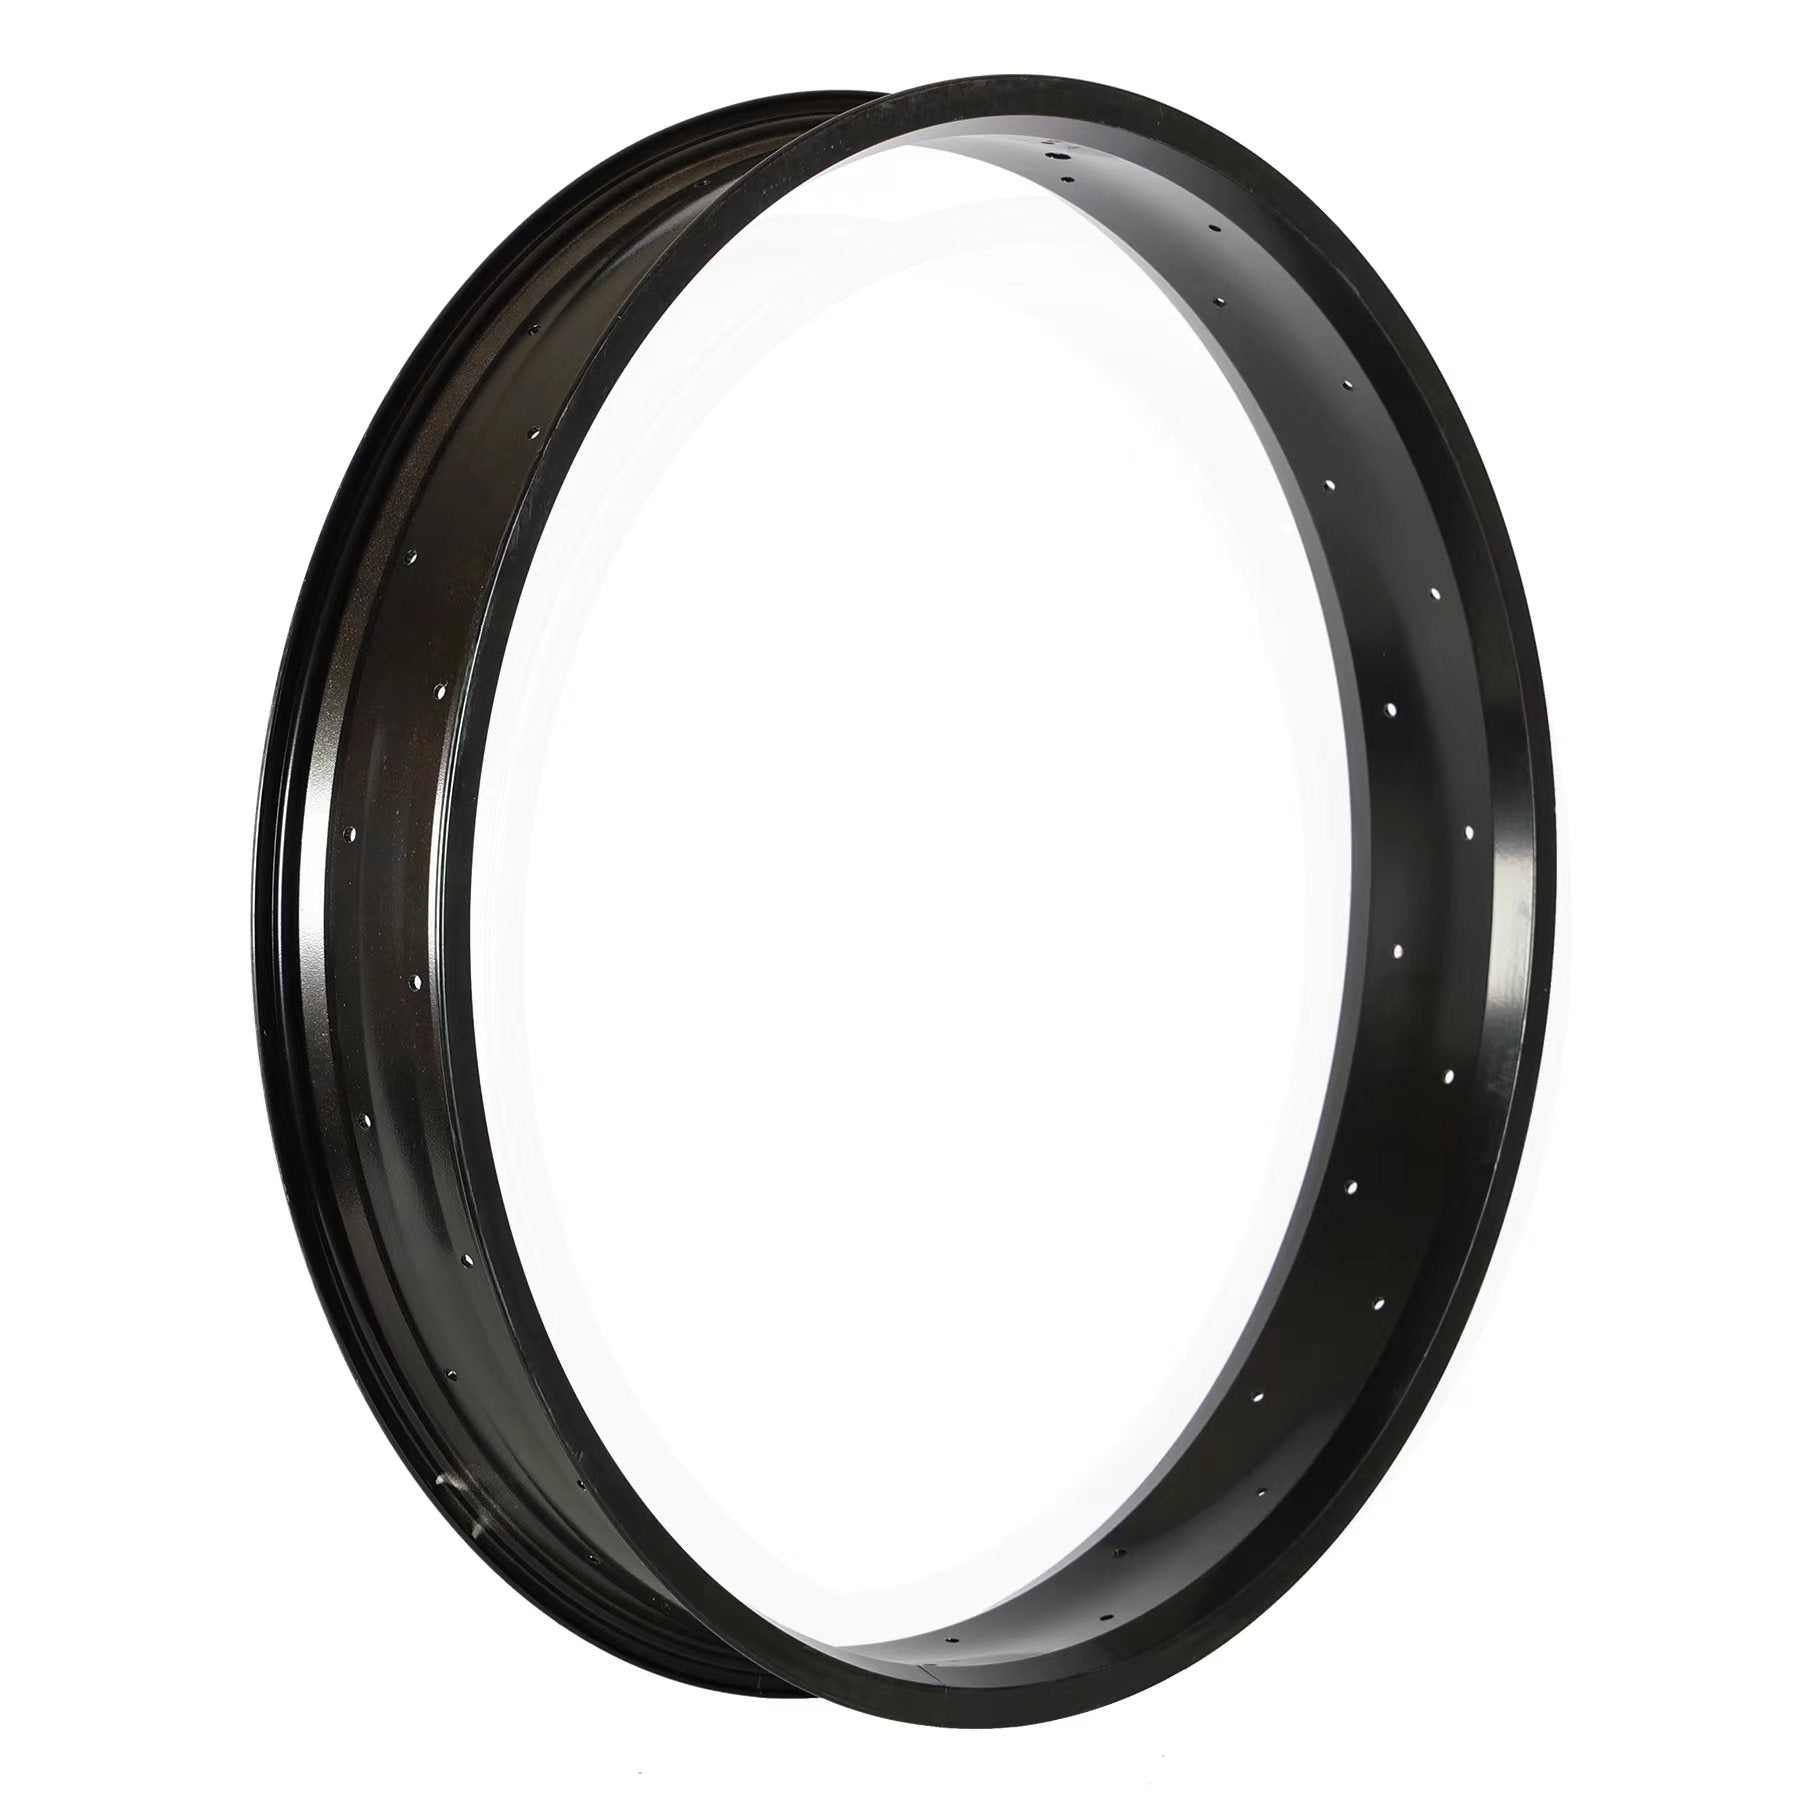 Tracer Bicycle Fat Rim 26" x 3" x 36H For Cruiser Bike